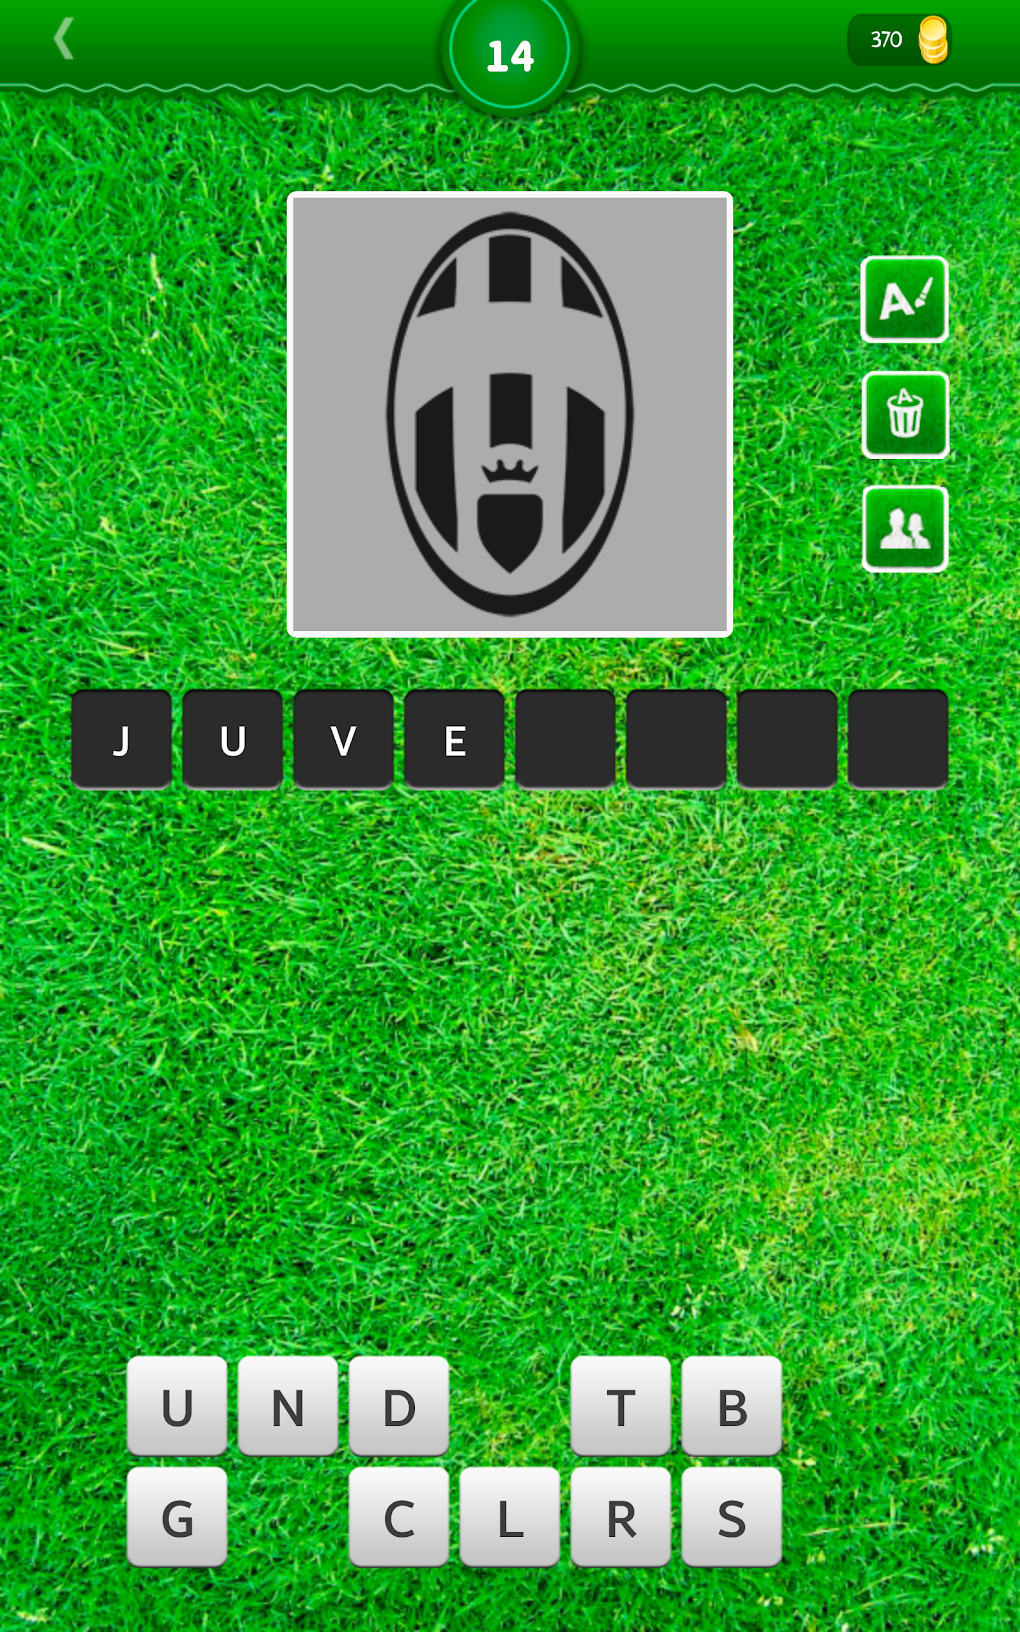 Guess the football club 2020 APK for Android - Download